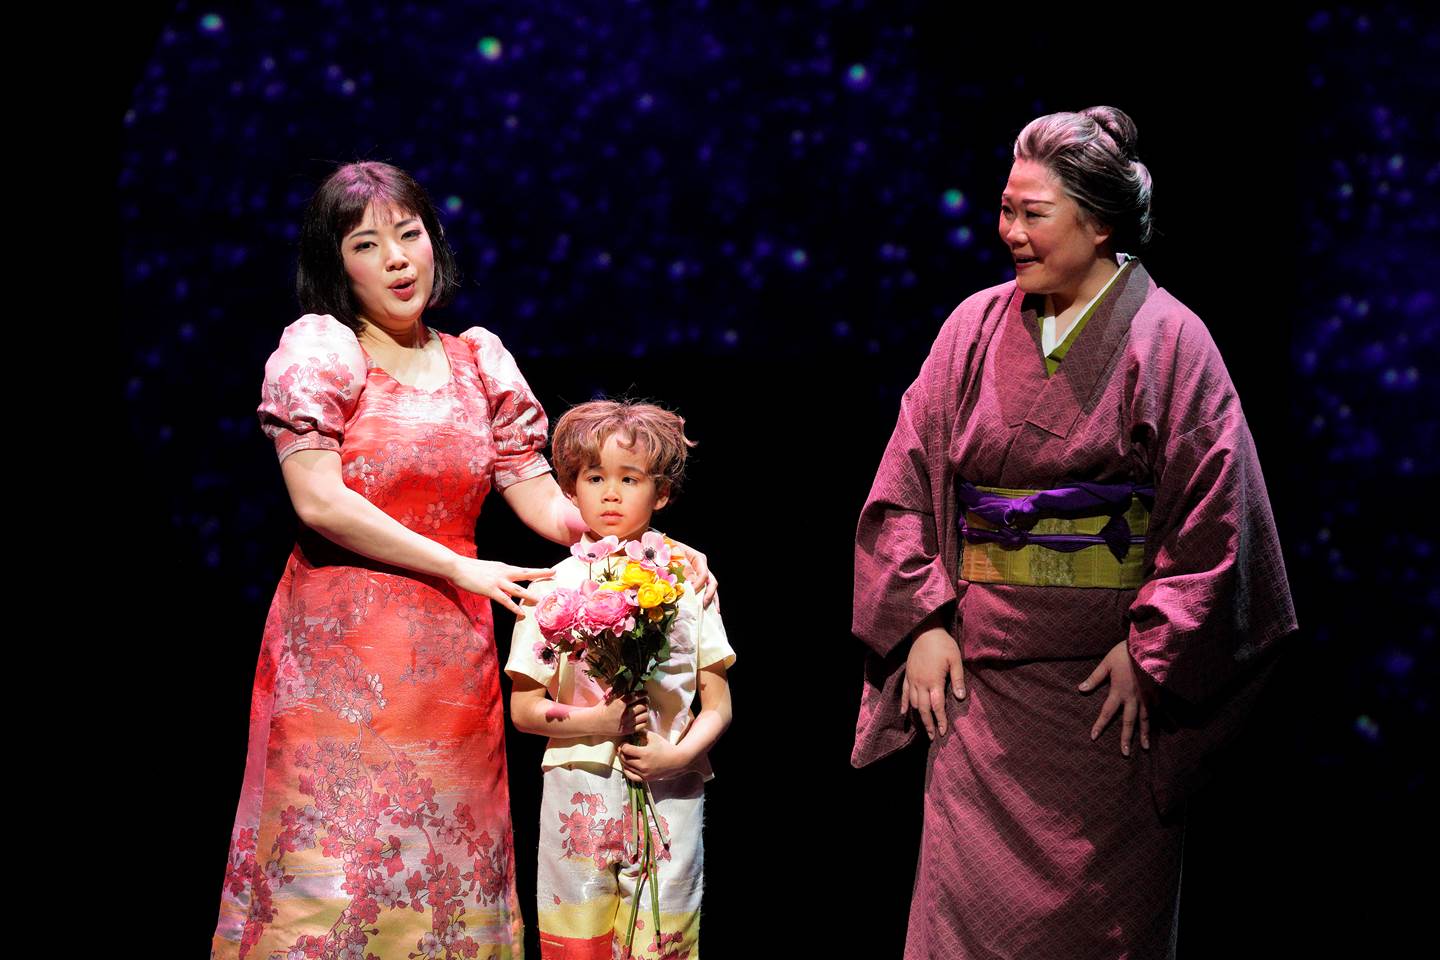 Madame Butterfly scene with child holding flowers